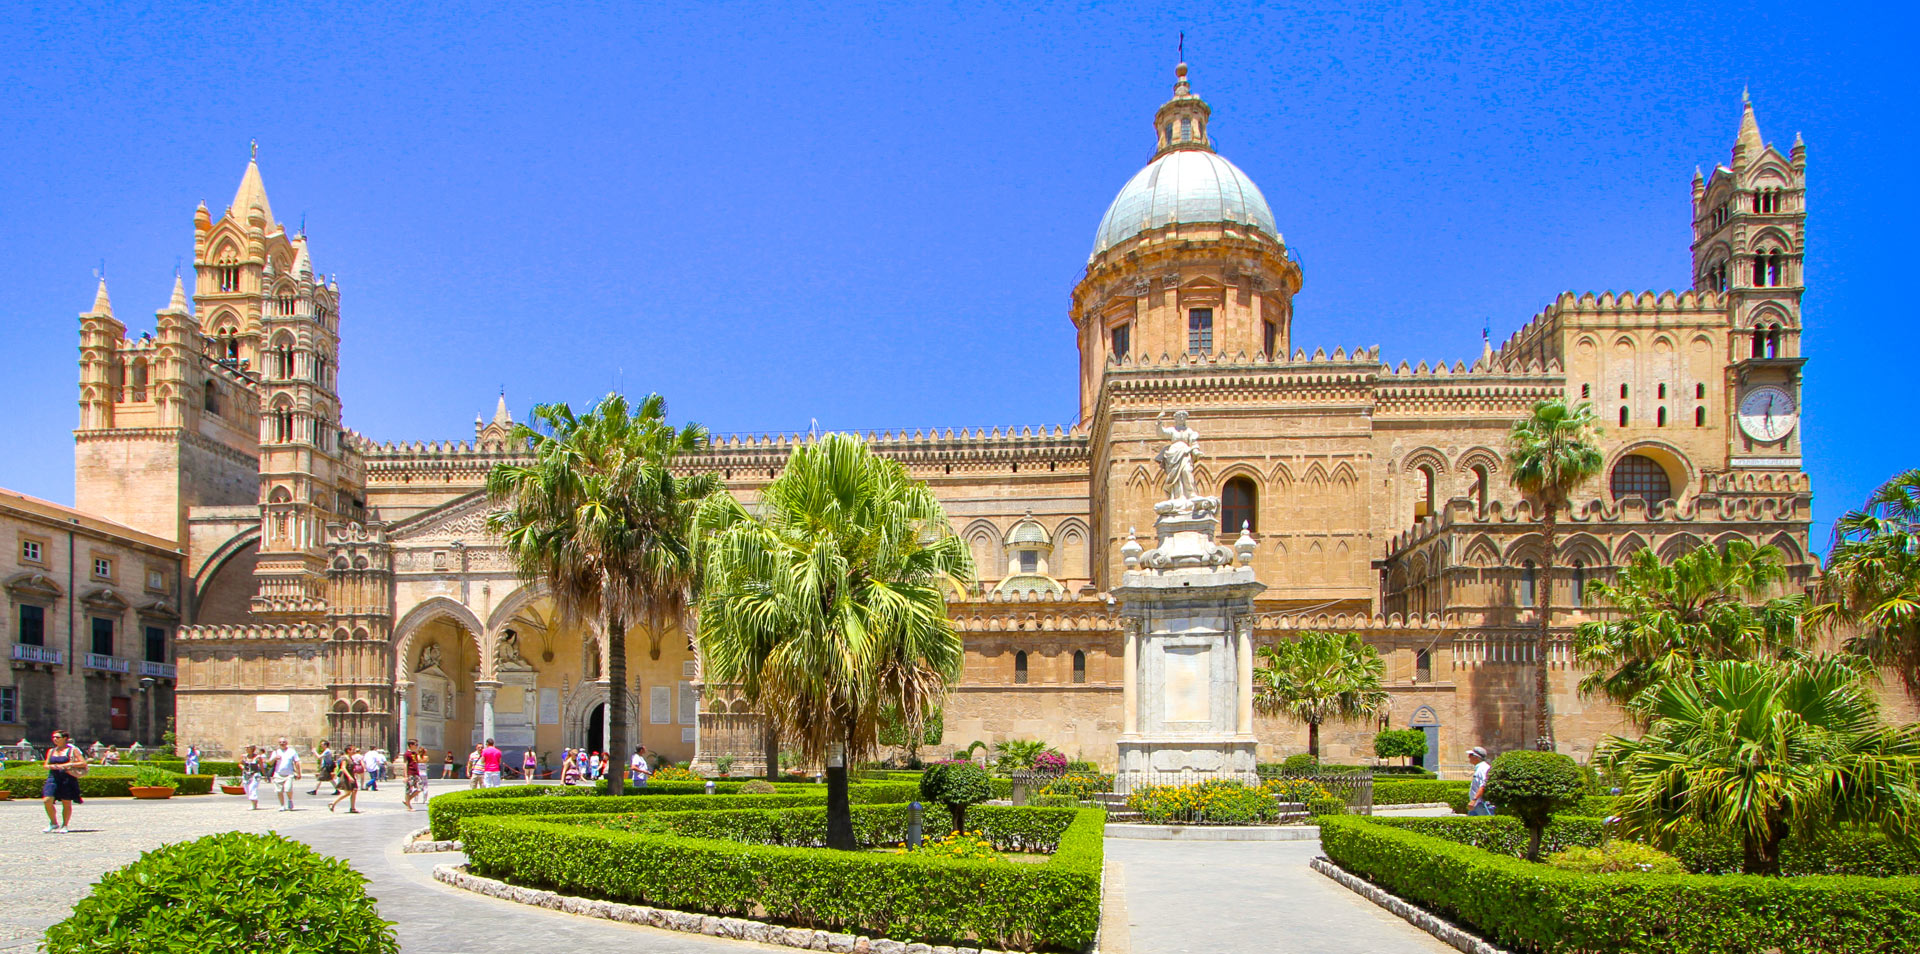 tourist attractions in sicily italy